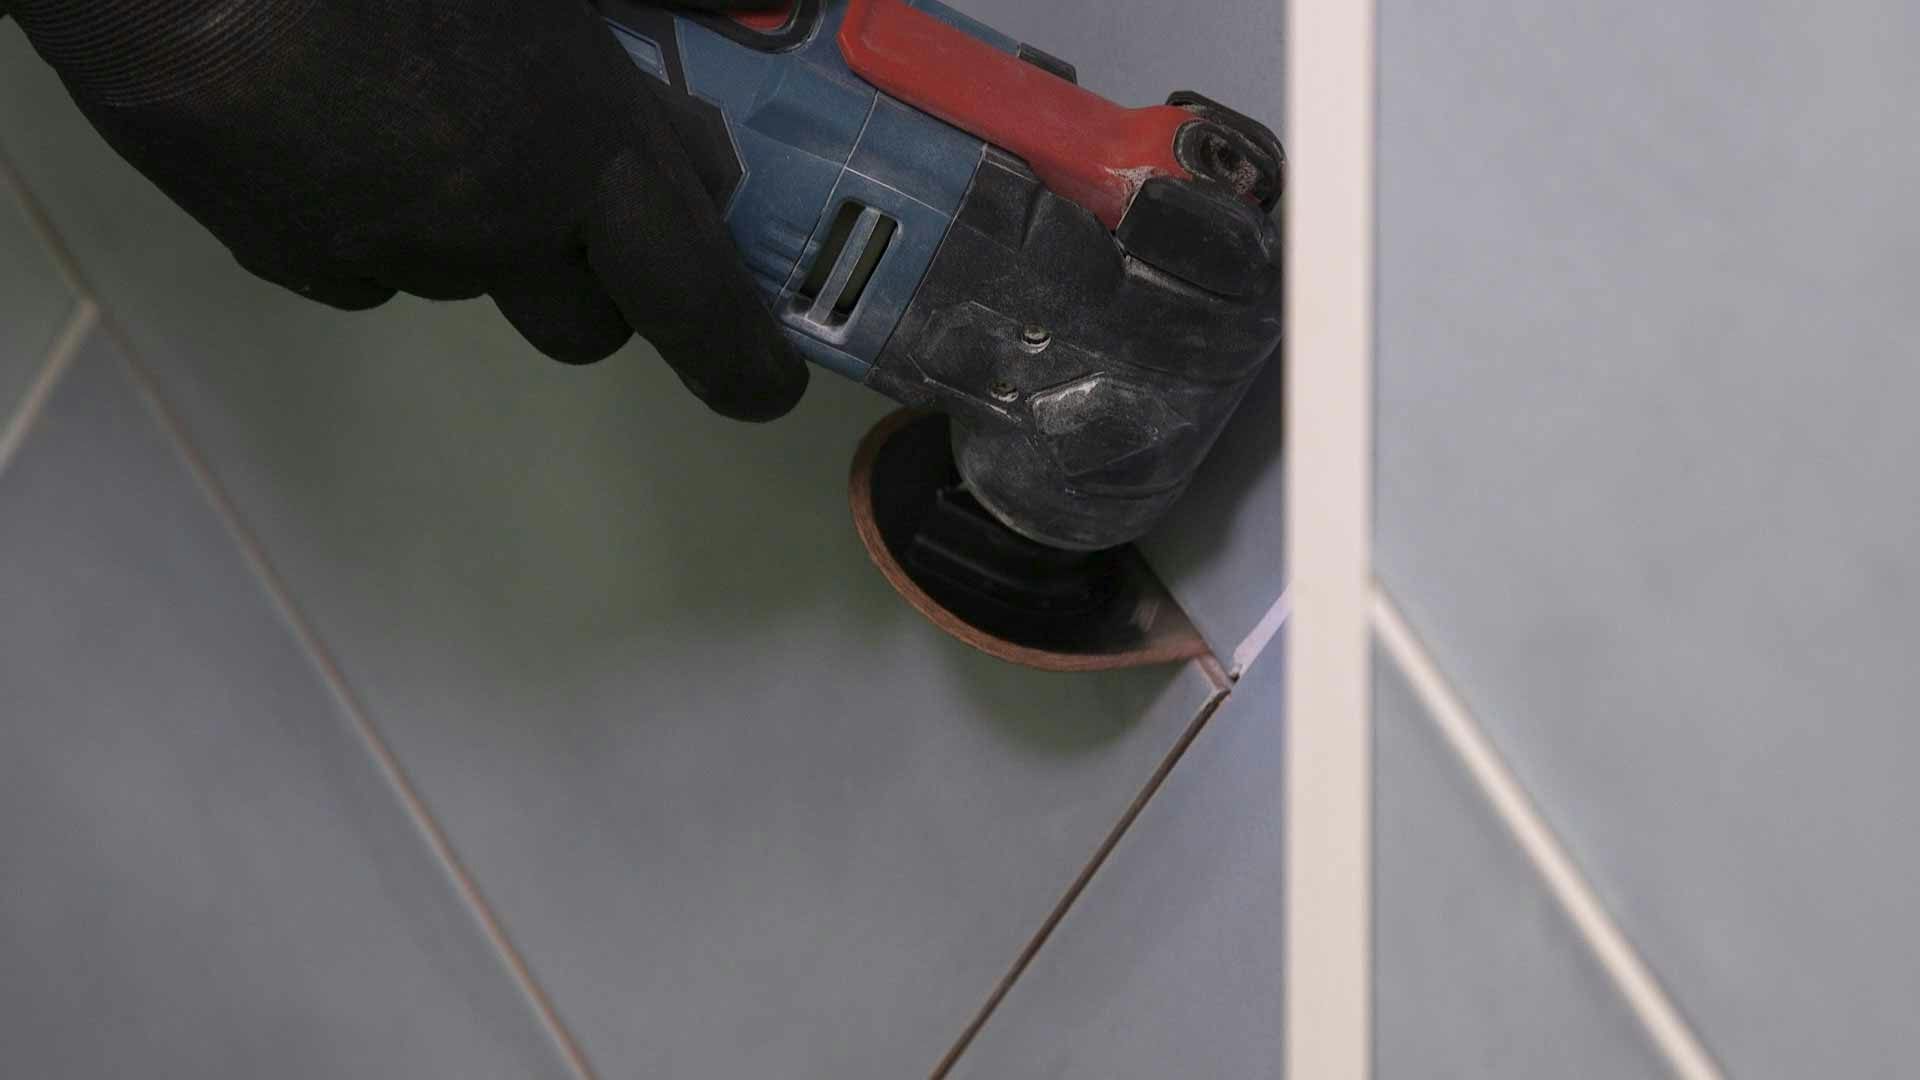 How To Remove Old Grout From Kitchen Or, Best Way To Remove Old Grout From Floor Tiles